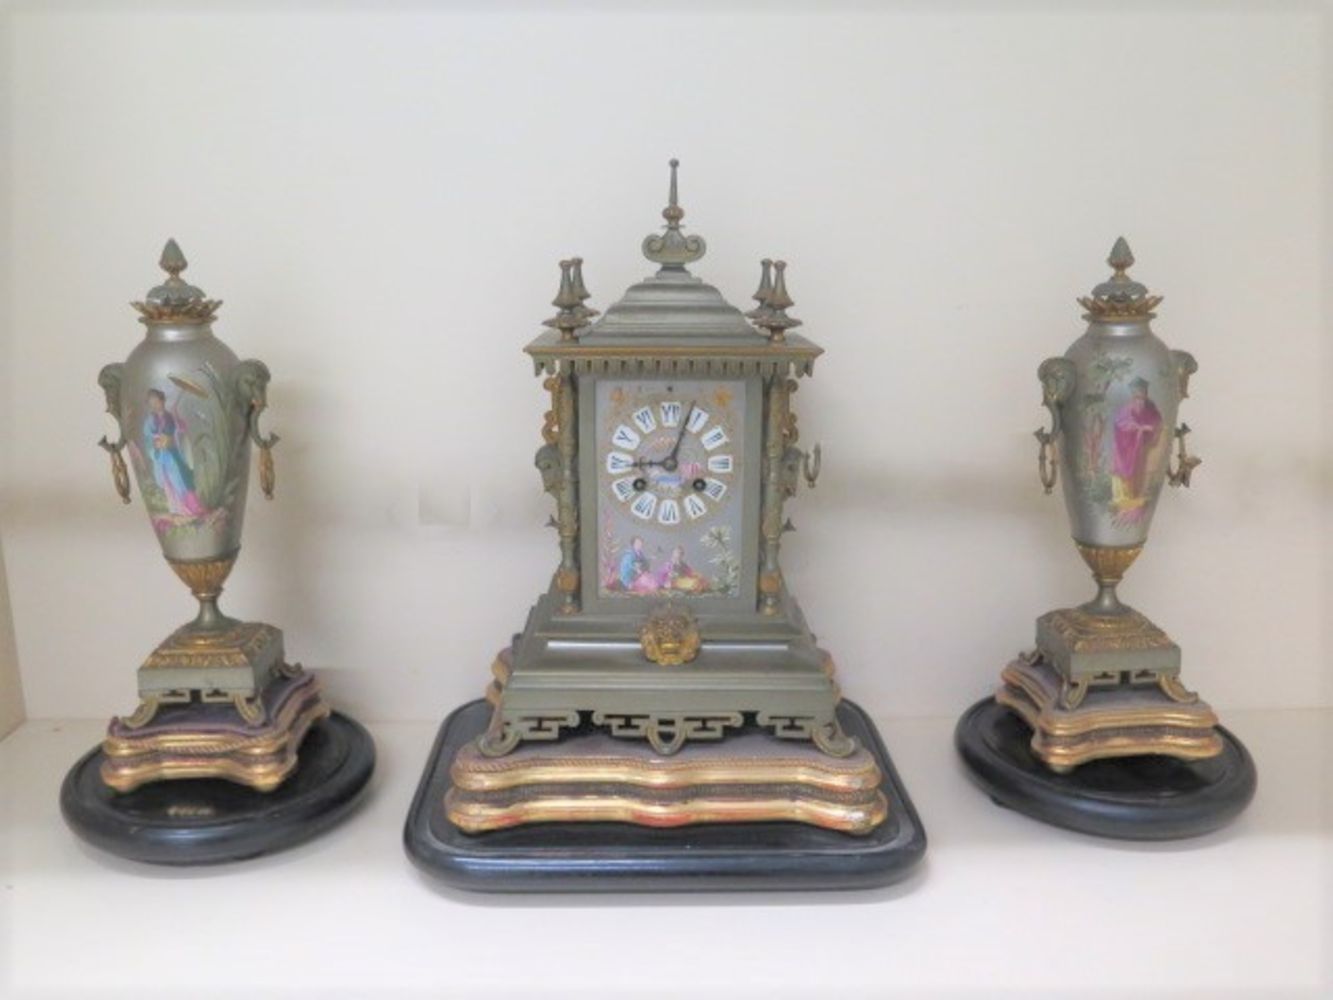 Modern, Antique and Fine Furniture, Specialist Clocks, Silver, Rugs, Paintings, Jewellery, Coins, Collectables